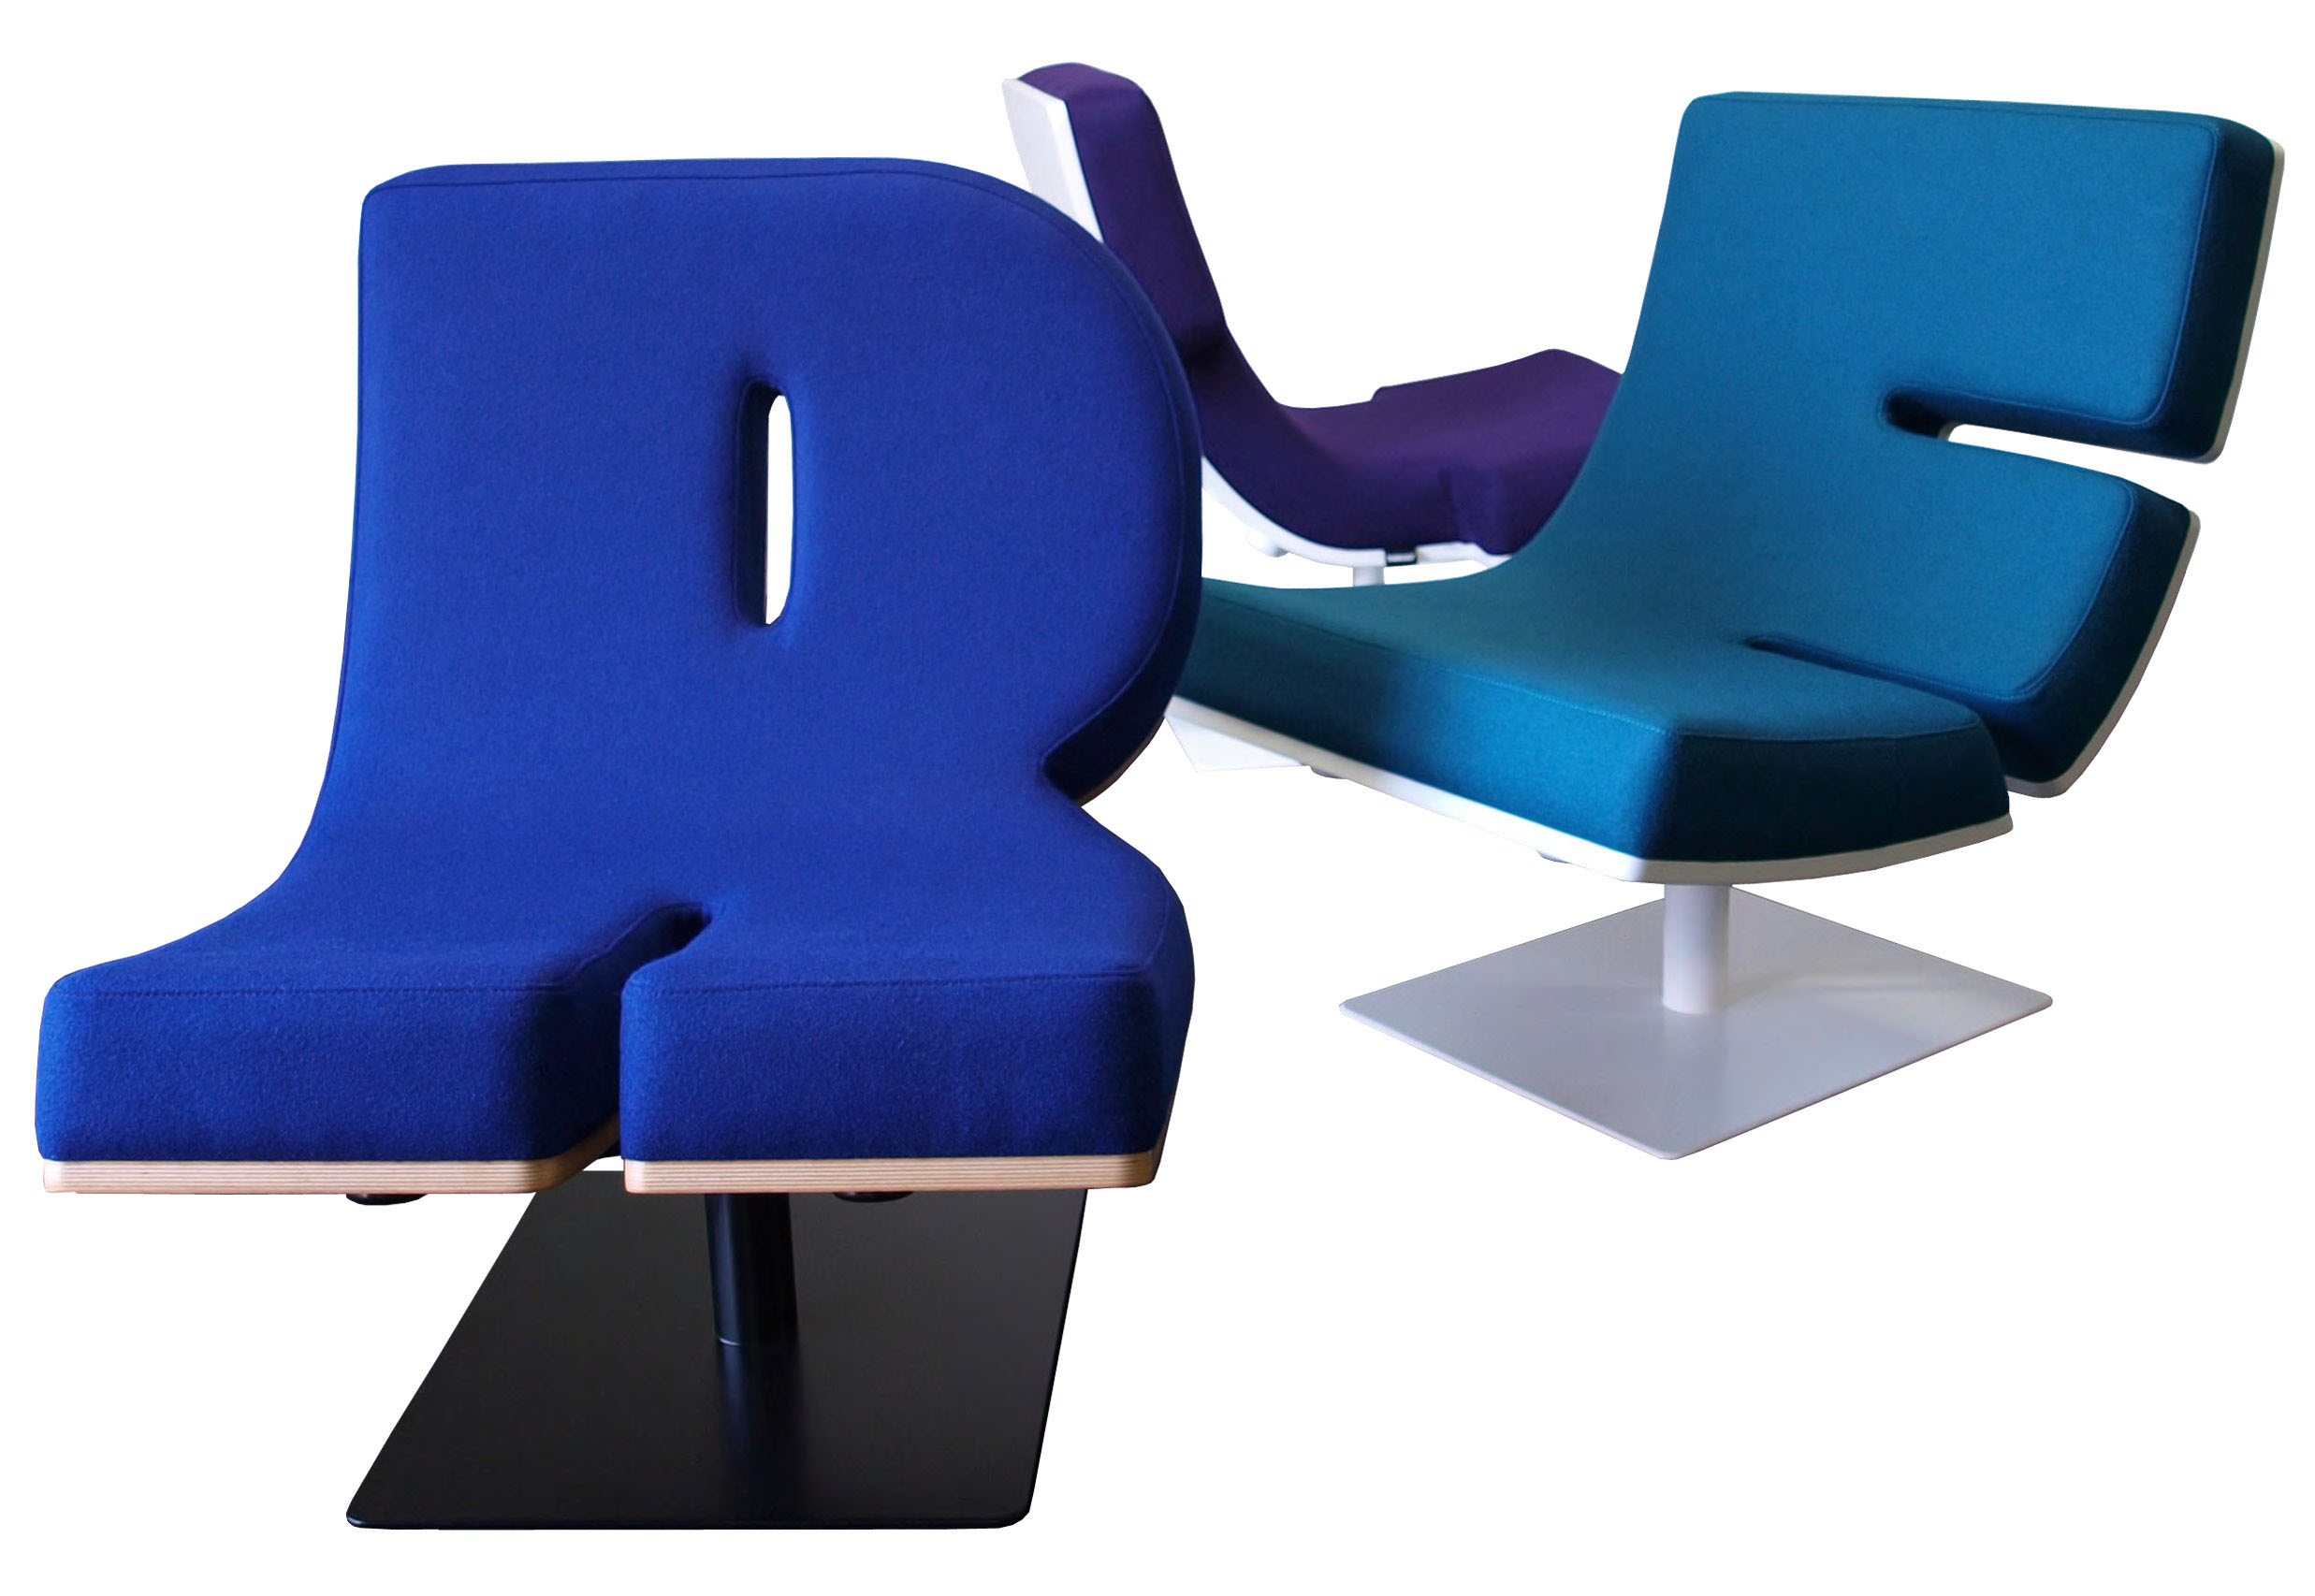 Chairs Design Tabisso Wonderful Chairs Design Of Typographic Tabisso With Shape Of R E And J Letters With Dark Blue And Purple Colors Furniture  Fantastic Unique Furniture Idea For Creating Personalized Rooms 